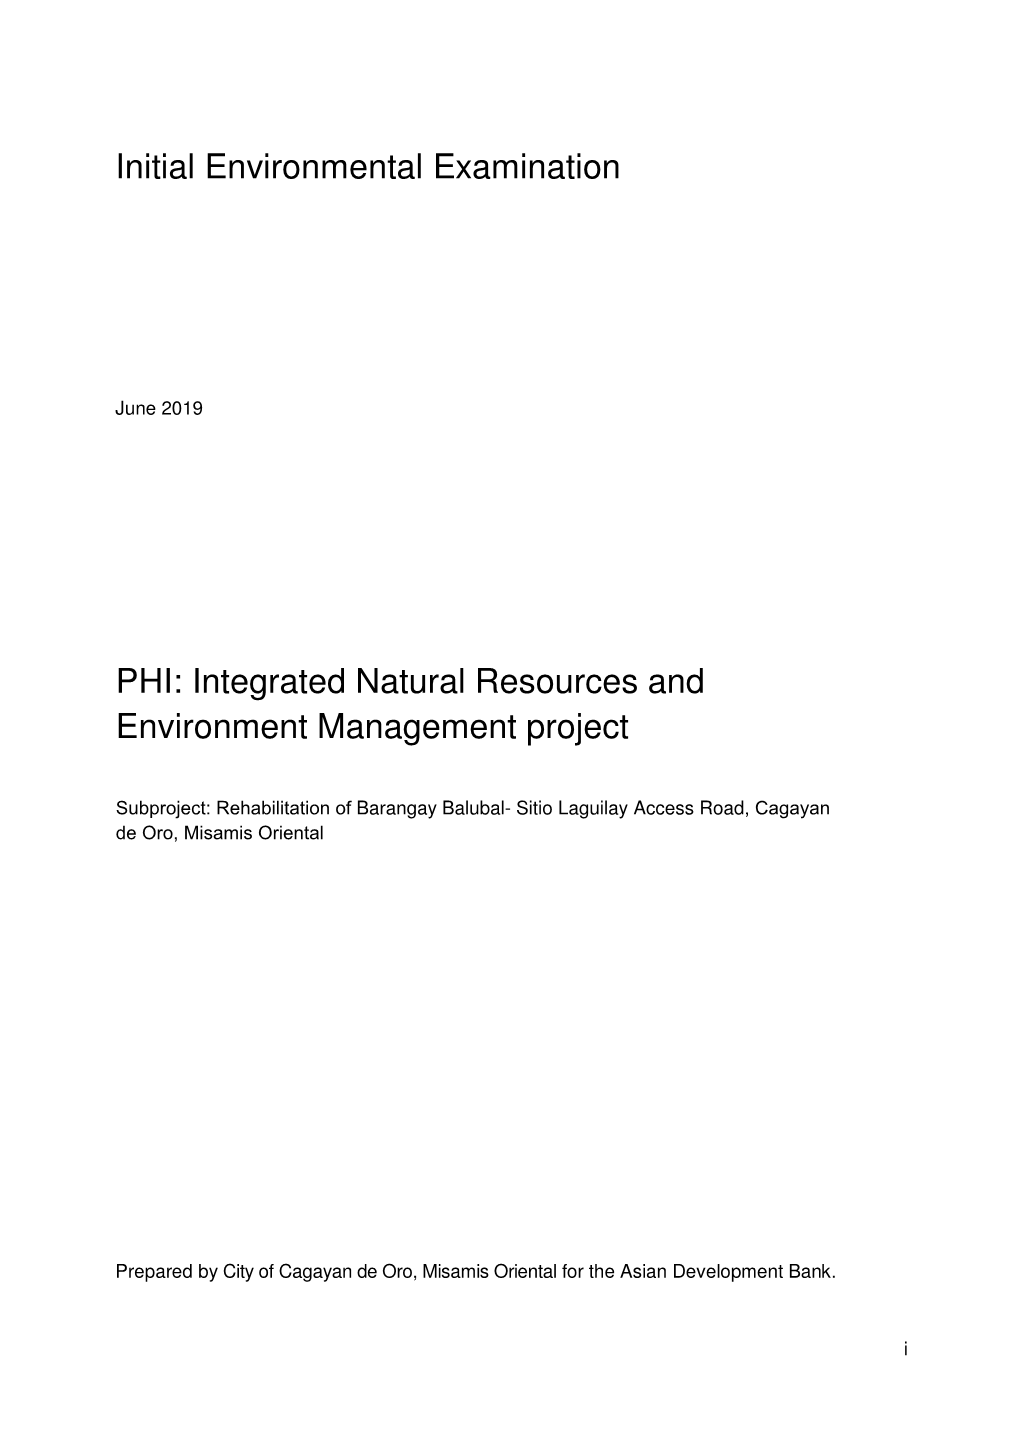 Integrated Natural Resources and Environment Management Project